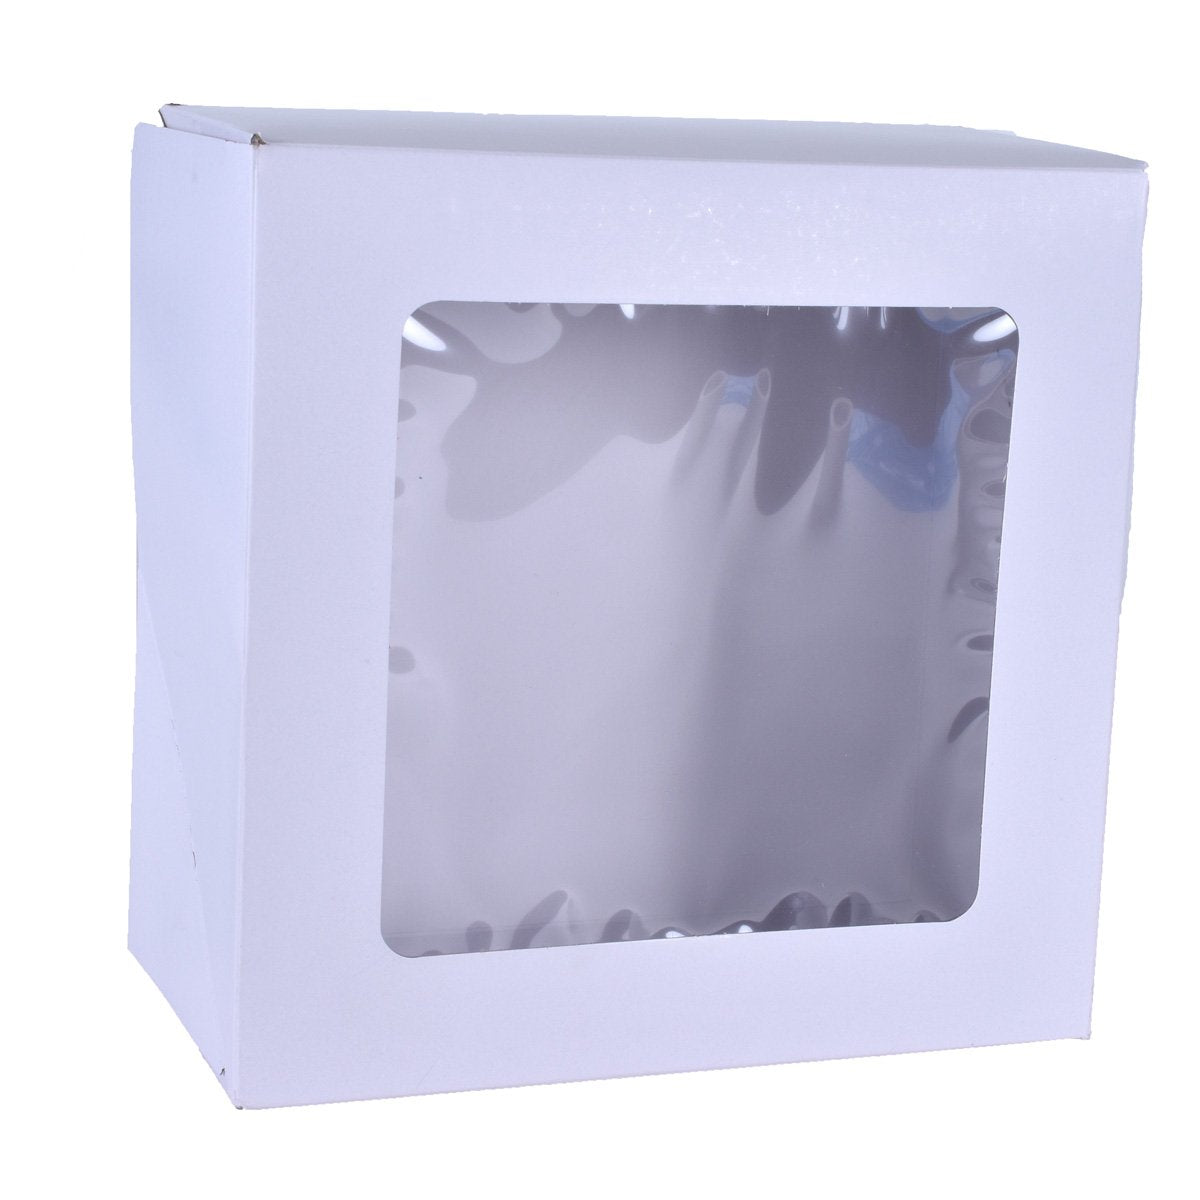 Pie Boxes With Window  — 9x9x2.5/10x10x2.5 Whalen Packaging Box - Bake Supply Plus